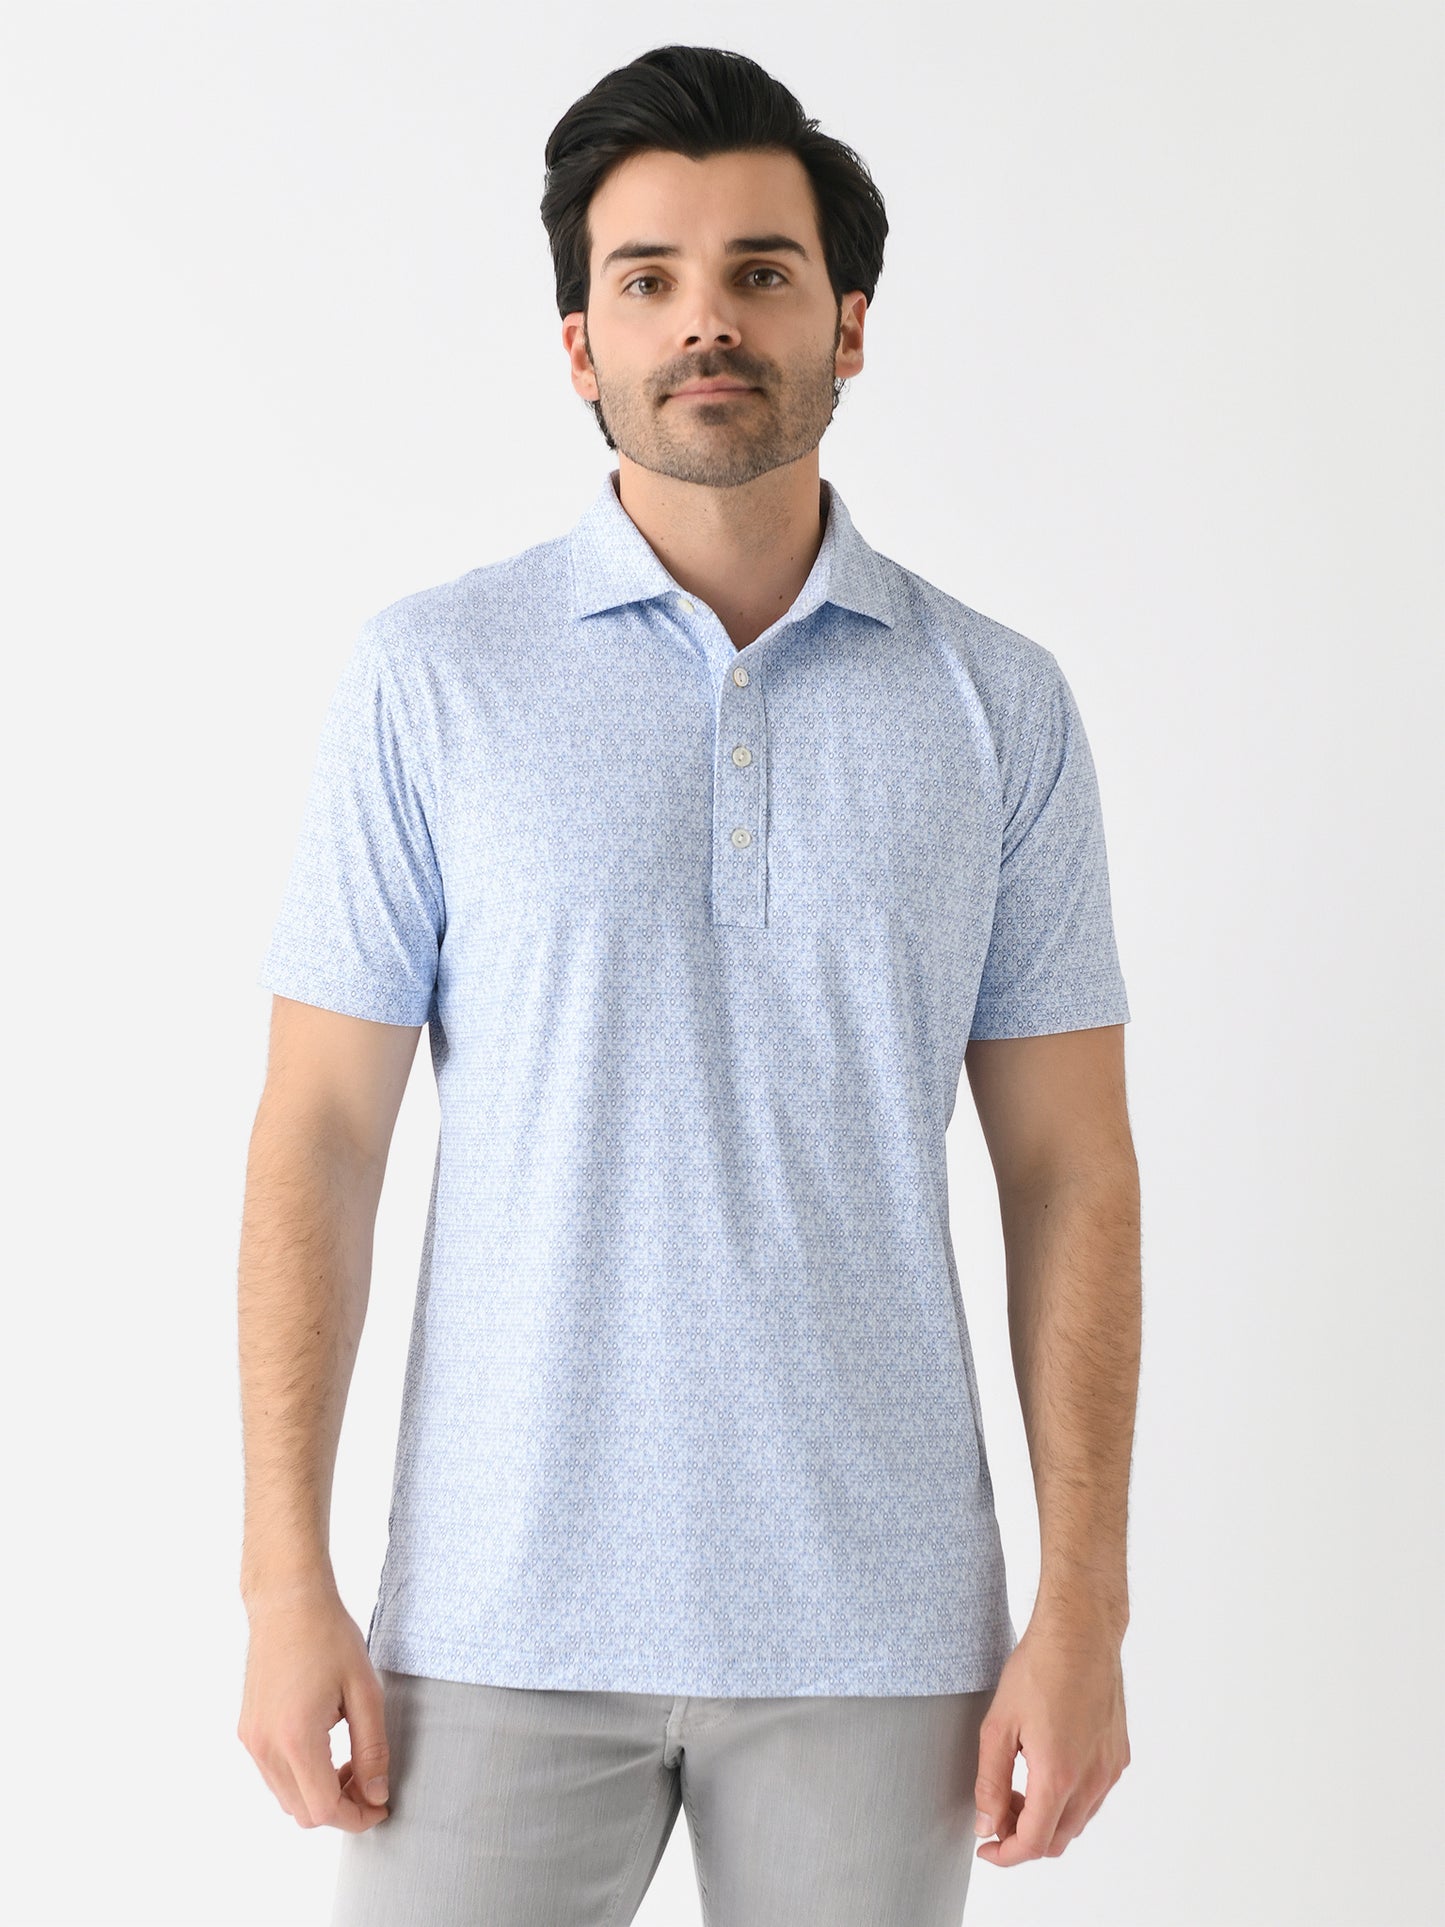 Peter Millar Crown Crafted Men's Rhythm Performance Jersey Polo